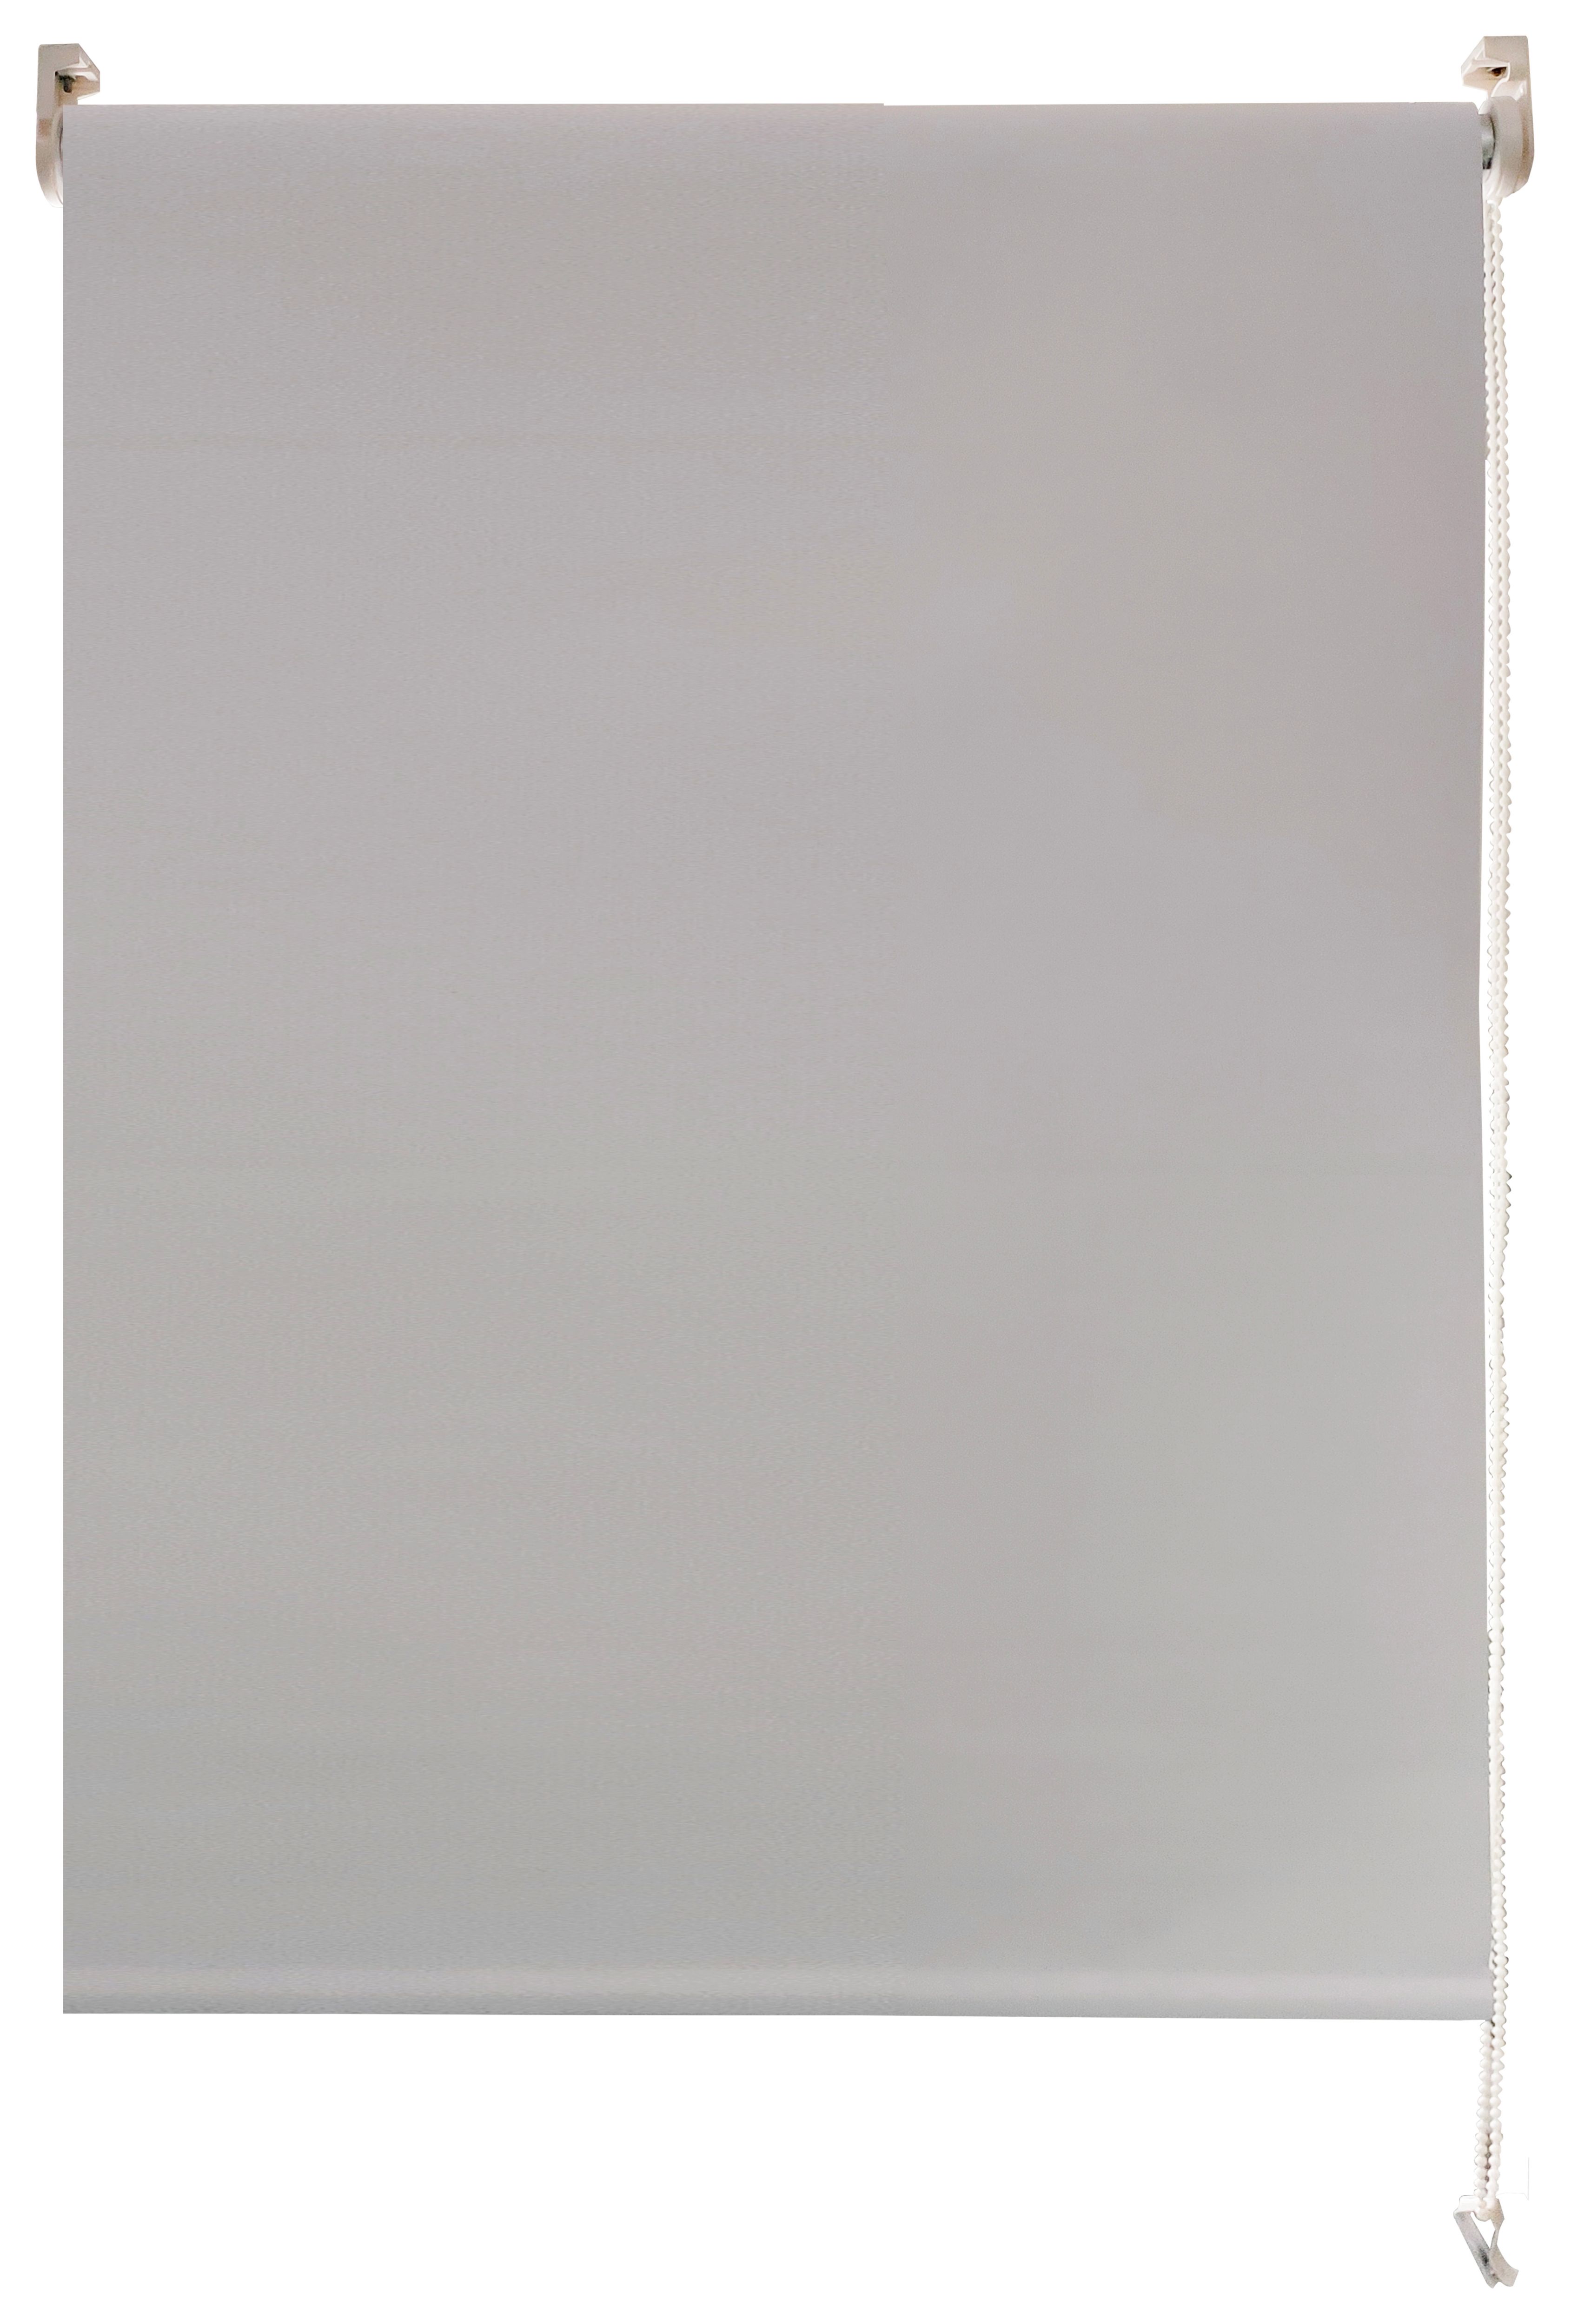 Image of Wickes Blackout Roller Blind Grey 180x170cm